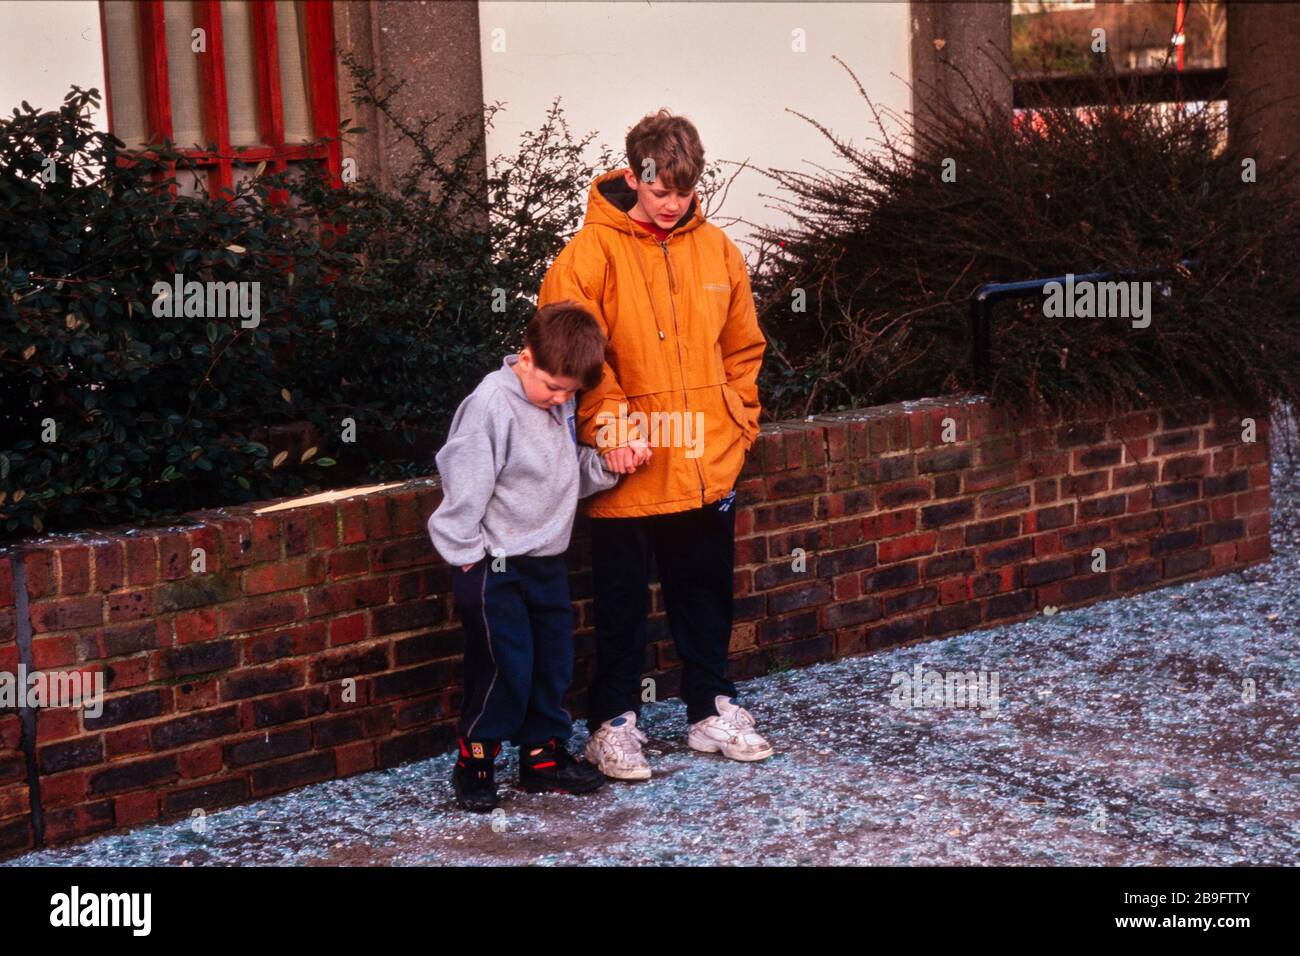 Local children draw patterns in the broken glass the day after the IRA detonated a powerful truck bomb in South Quay, London Docklands on 9 Feb 1996, the killing two & causing £150 million worth of damage. Stock Photo